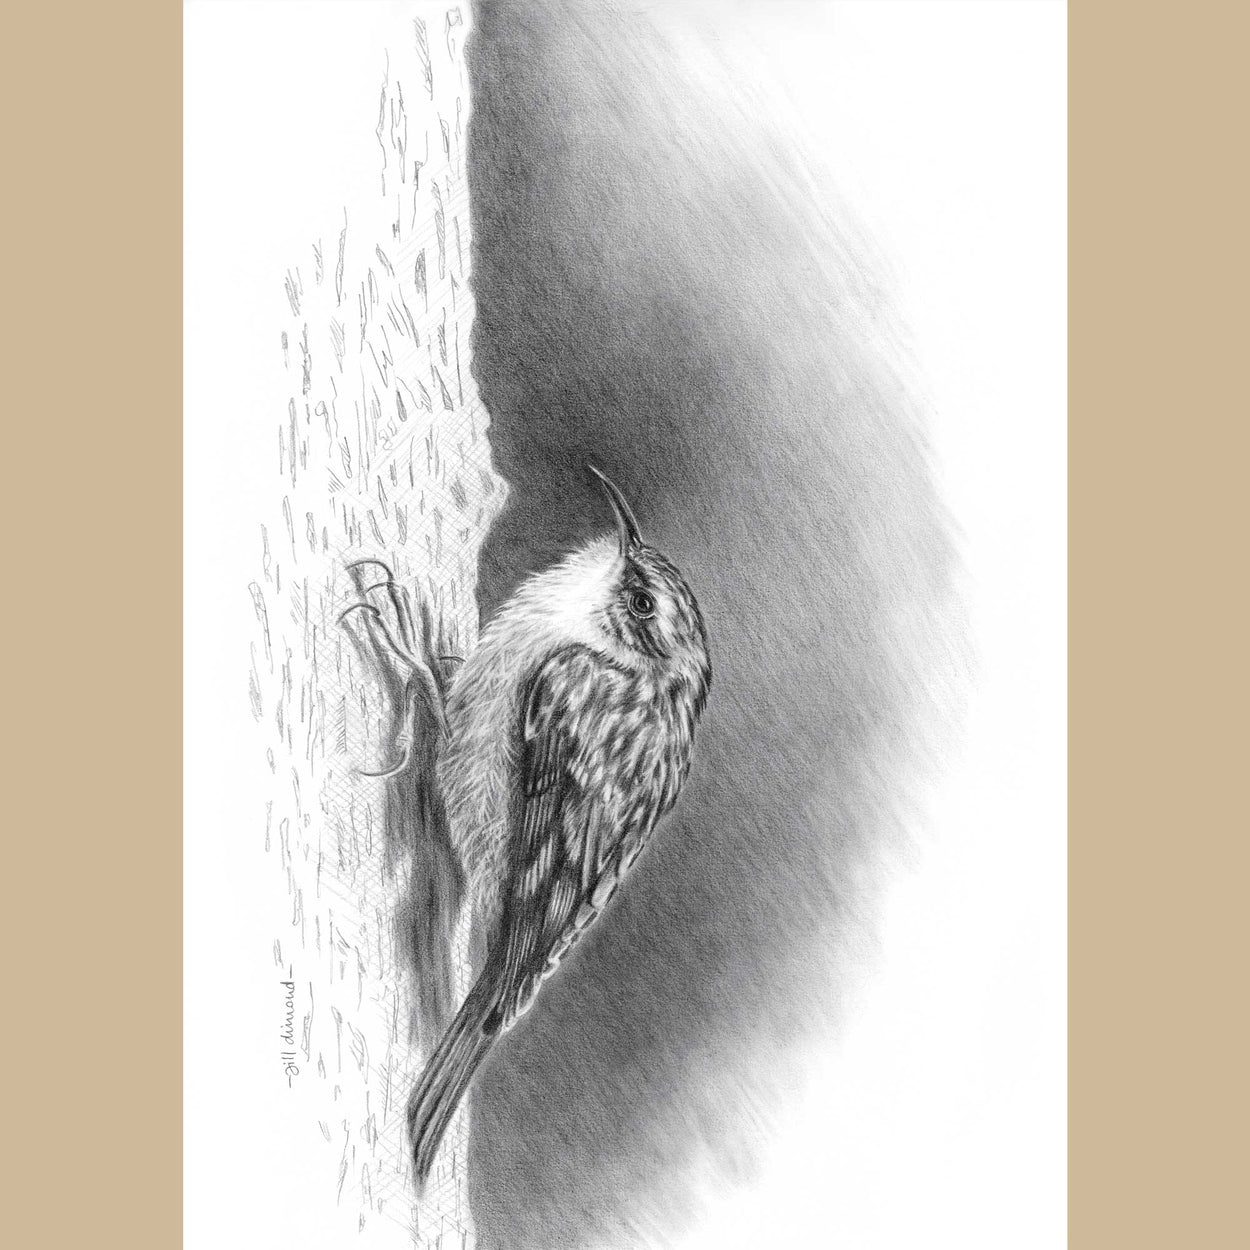 Black and white drawing of a small treecreeper bird clinging to a tree trunk